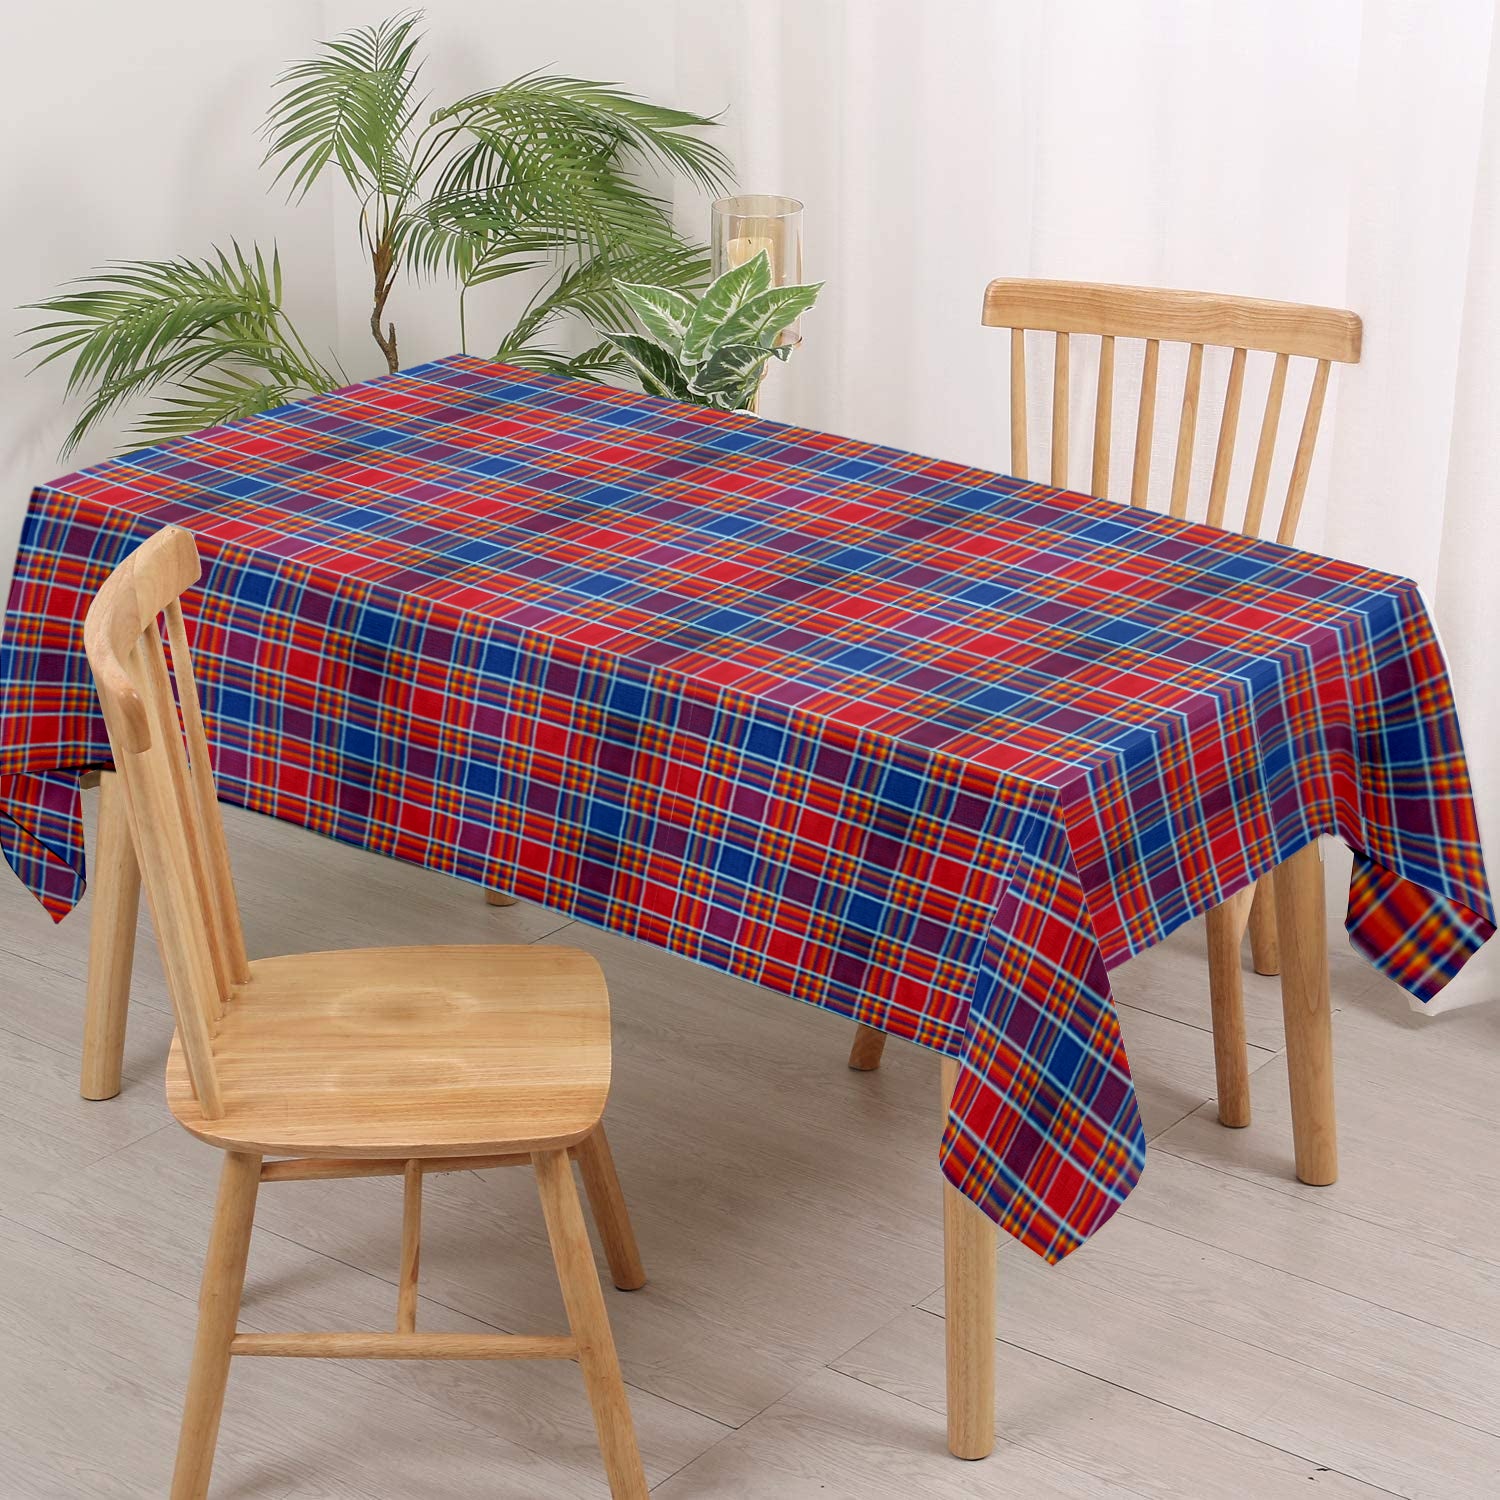 Lushomes table cloth Cotton, center table cover, table cloth for centre table, Also Used As table cloth for study table, Red Checks Table Cover with 1 Cms Hem (Pk of 1, Size: 36x60 Inch, 3x5 FT)